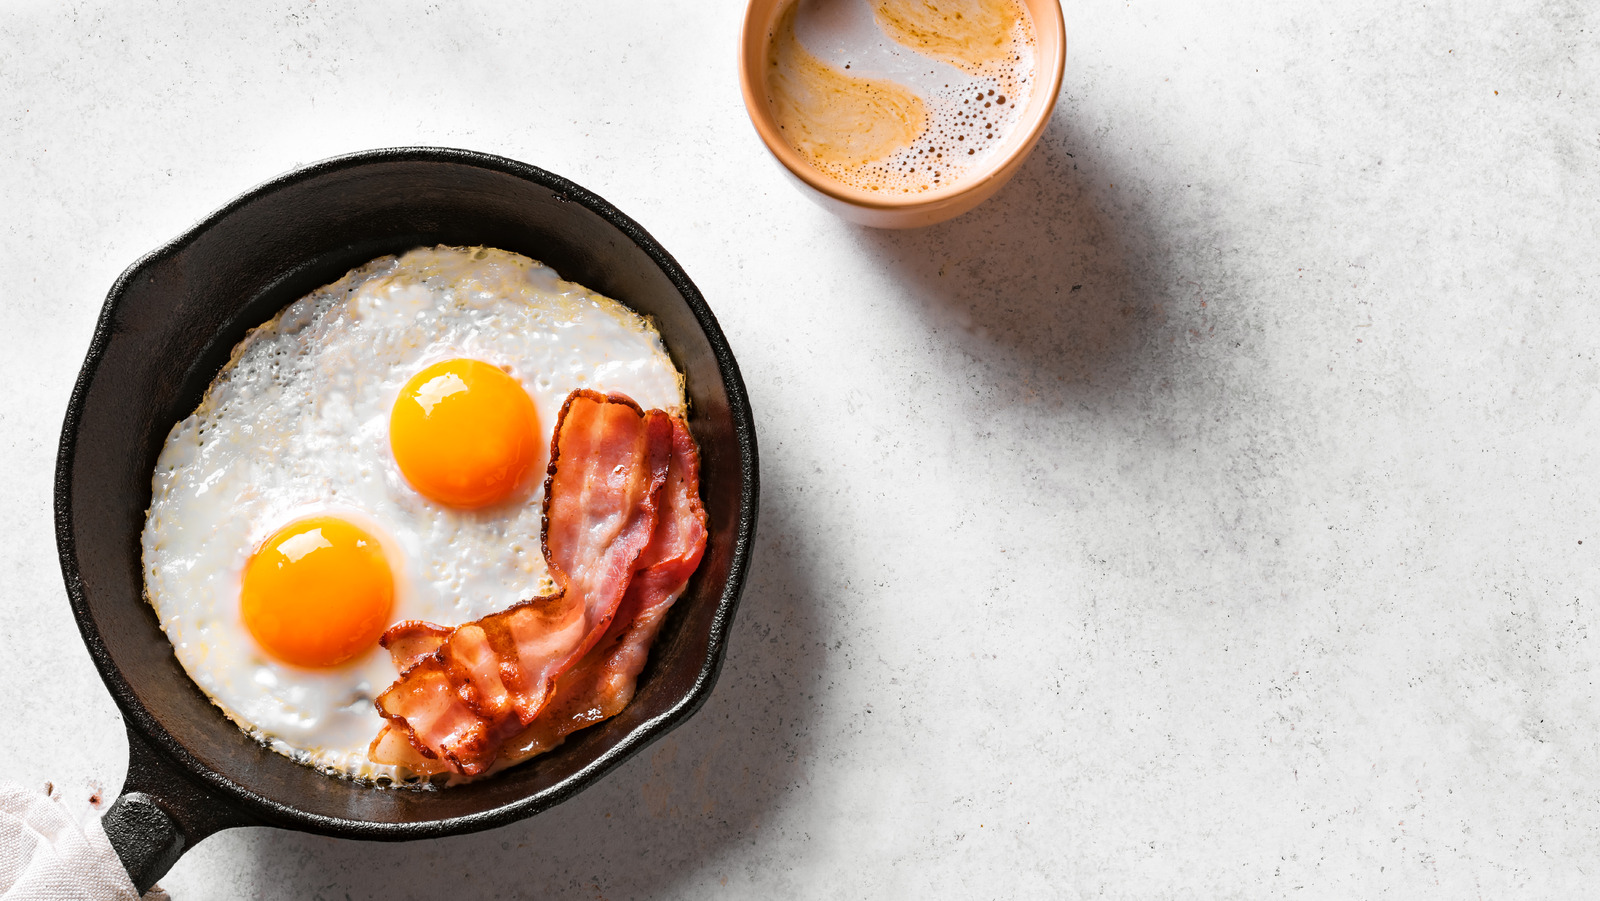 https://www.thedailymeal.com/img/gallery/the-best-way-to-keep-the-yolk-intact-when-frying-eggs/l-intro-1681758496.jpg